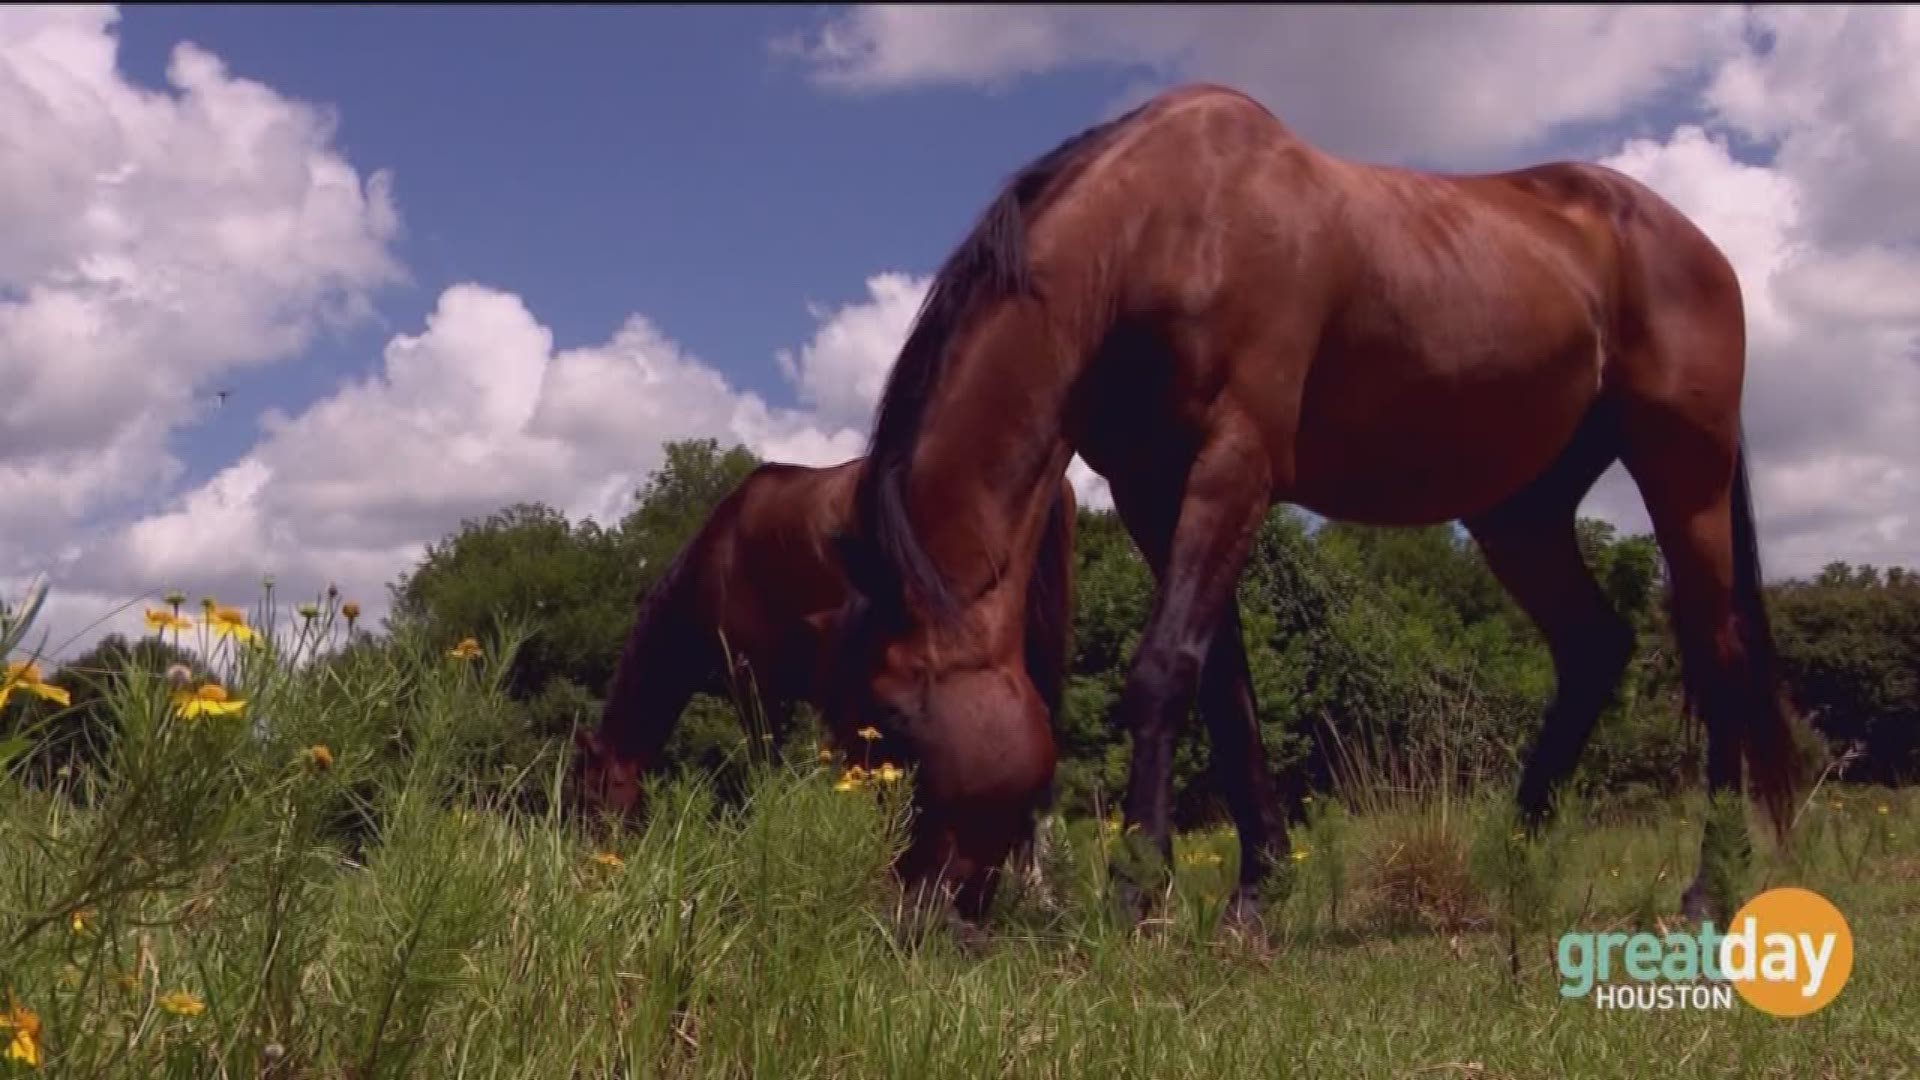 Great Day Houston photographer Frank McBride showed us how A Place For Peanut comes to the rescue of horses in need